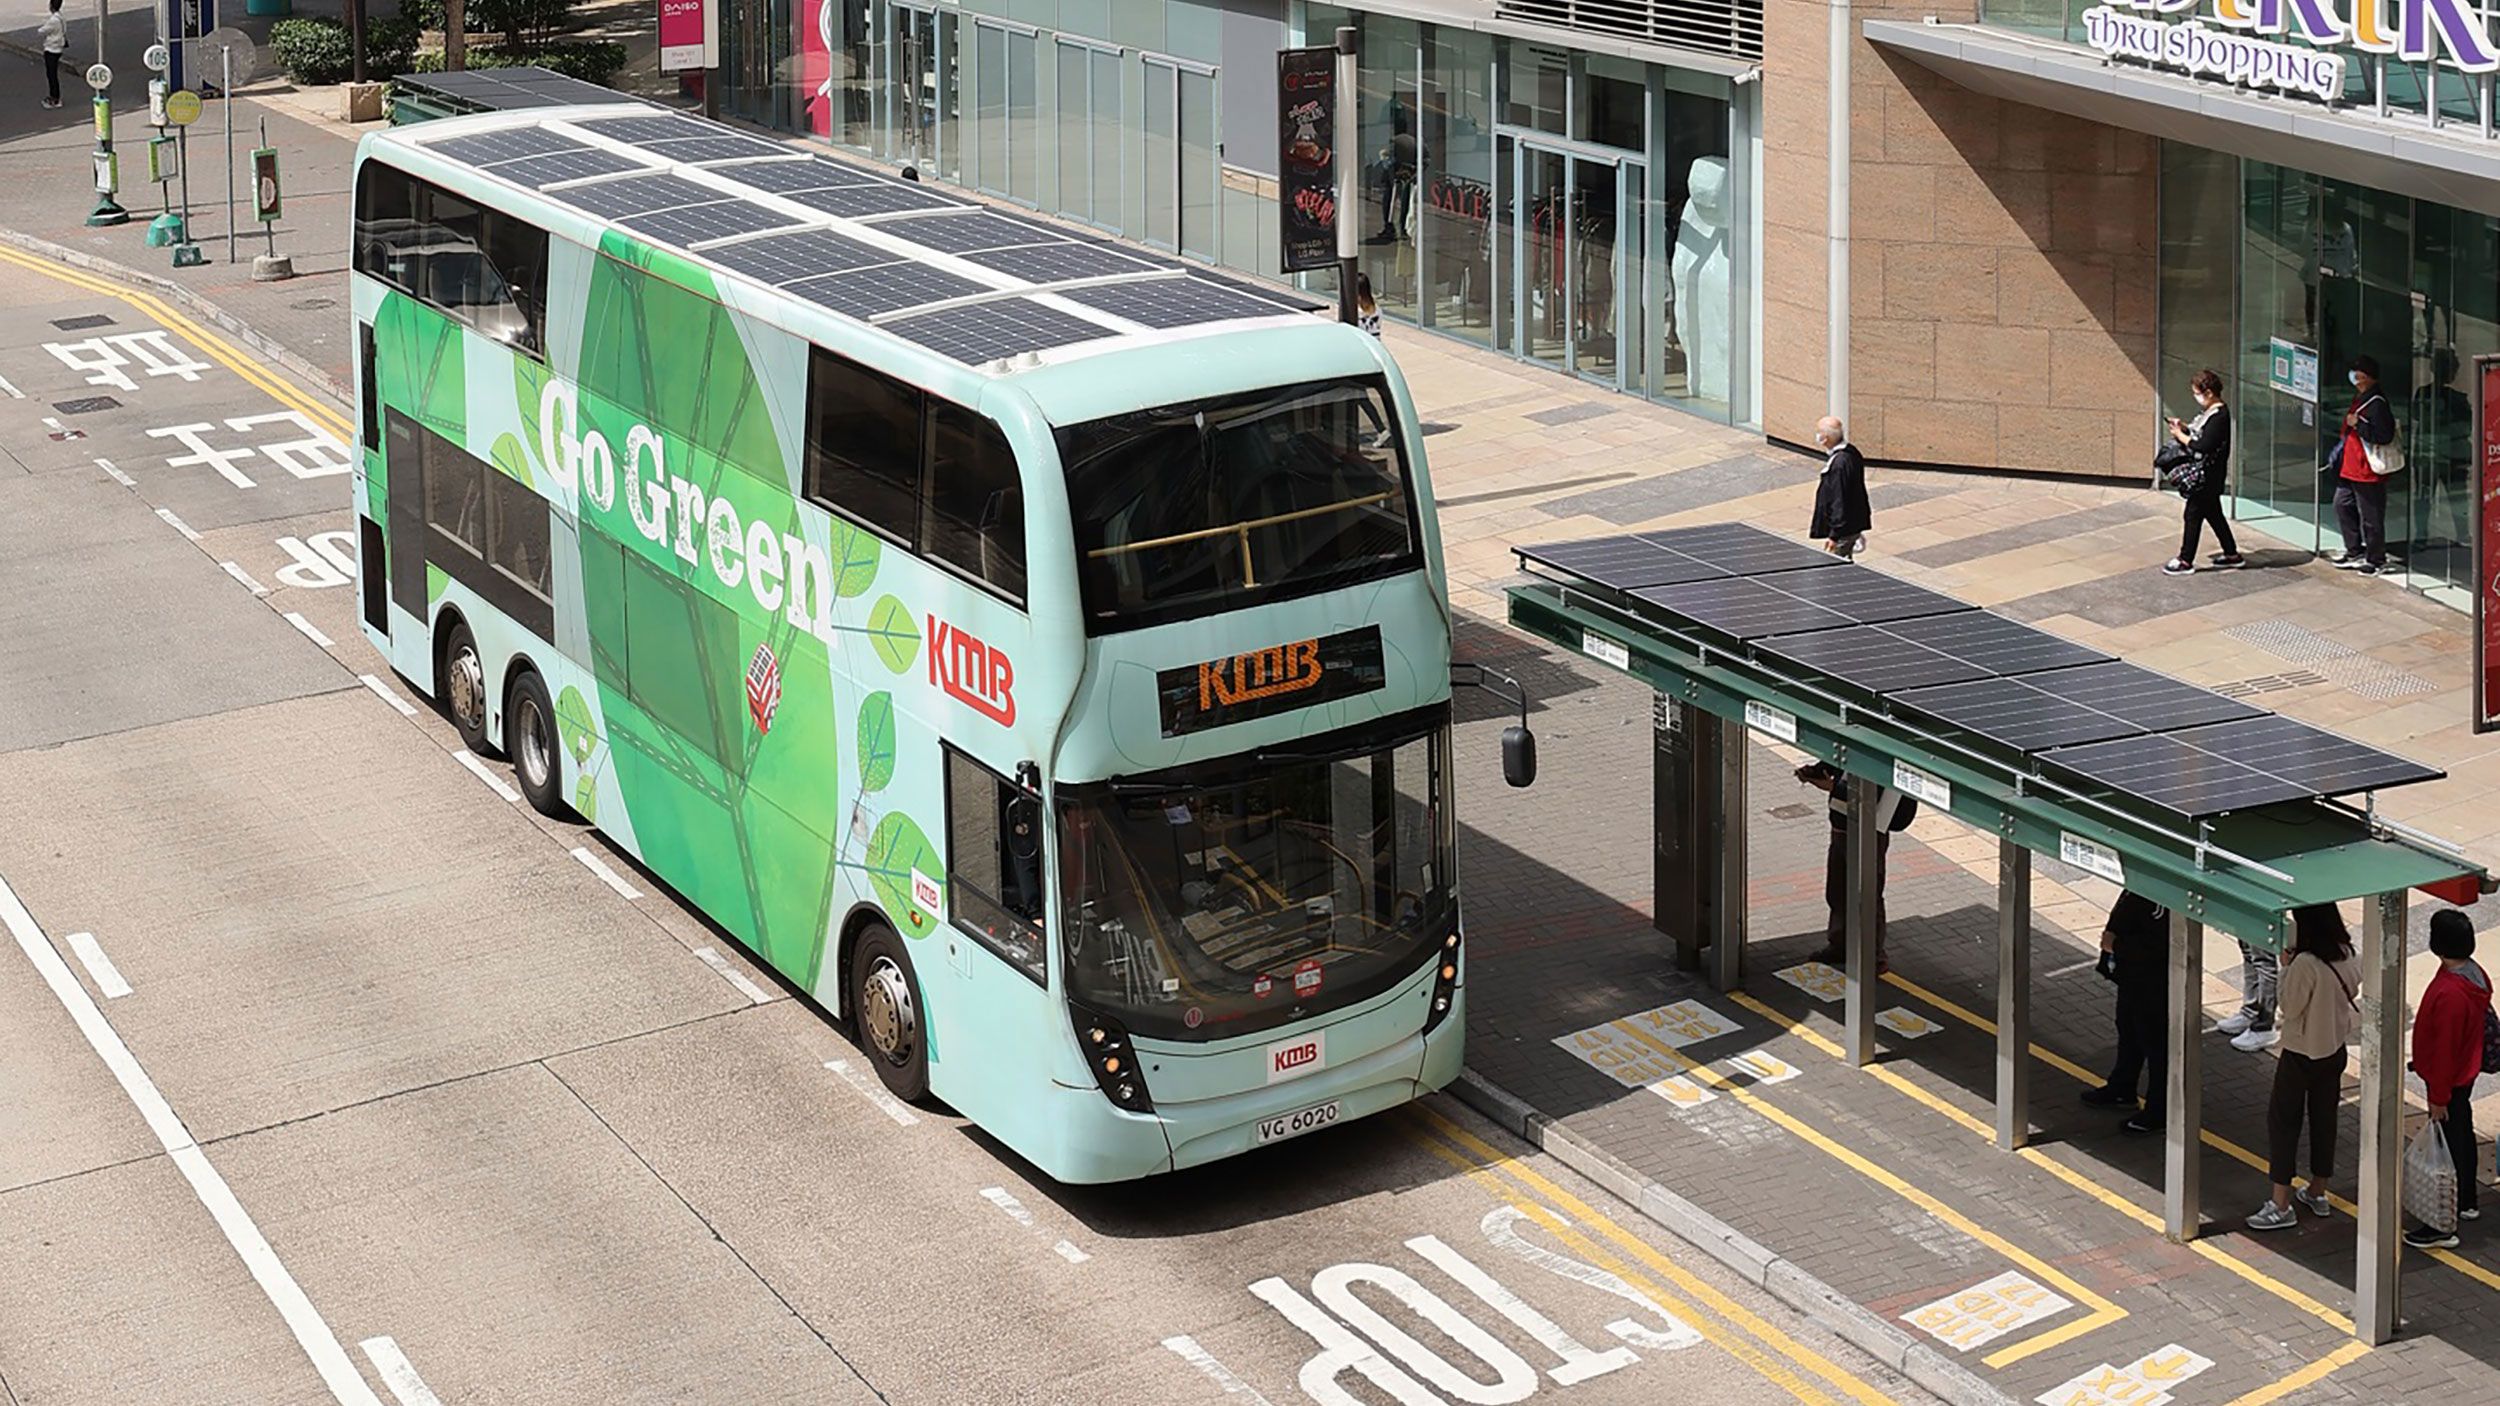 <strong>Fuel-free commutes:</strong> There are moves towards a brighter future in public transport, too. In Hong Kong, the <a href="index.php?page=&url=https%3A%2F%2Fwww.kmb.hk%2Fen%2Fnews%2Fpress%2Farchives%2Fnews202105143826.html" target="_blank" target="_blank">Kowloon Motor Bus Company</a> (KMB) has kitted out over 100 double-decker buses with solar panels, which it says reduce fuel consumption by up to 8%. Now a standard specification for all its new buses, KMB hopes to have 2,000 solar-powered buses on the road by next year.